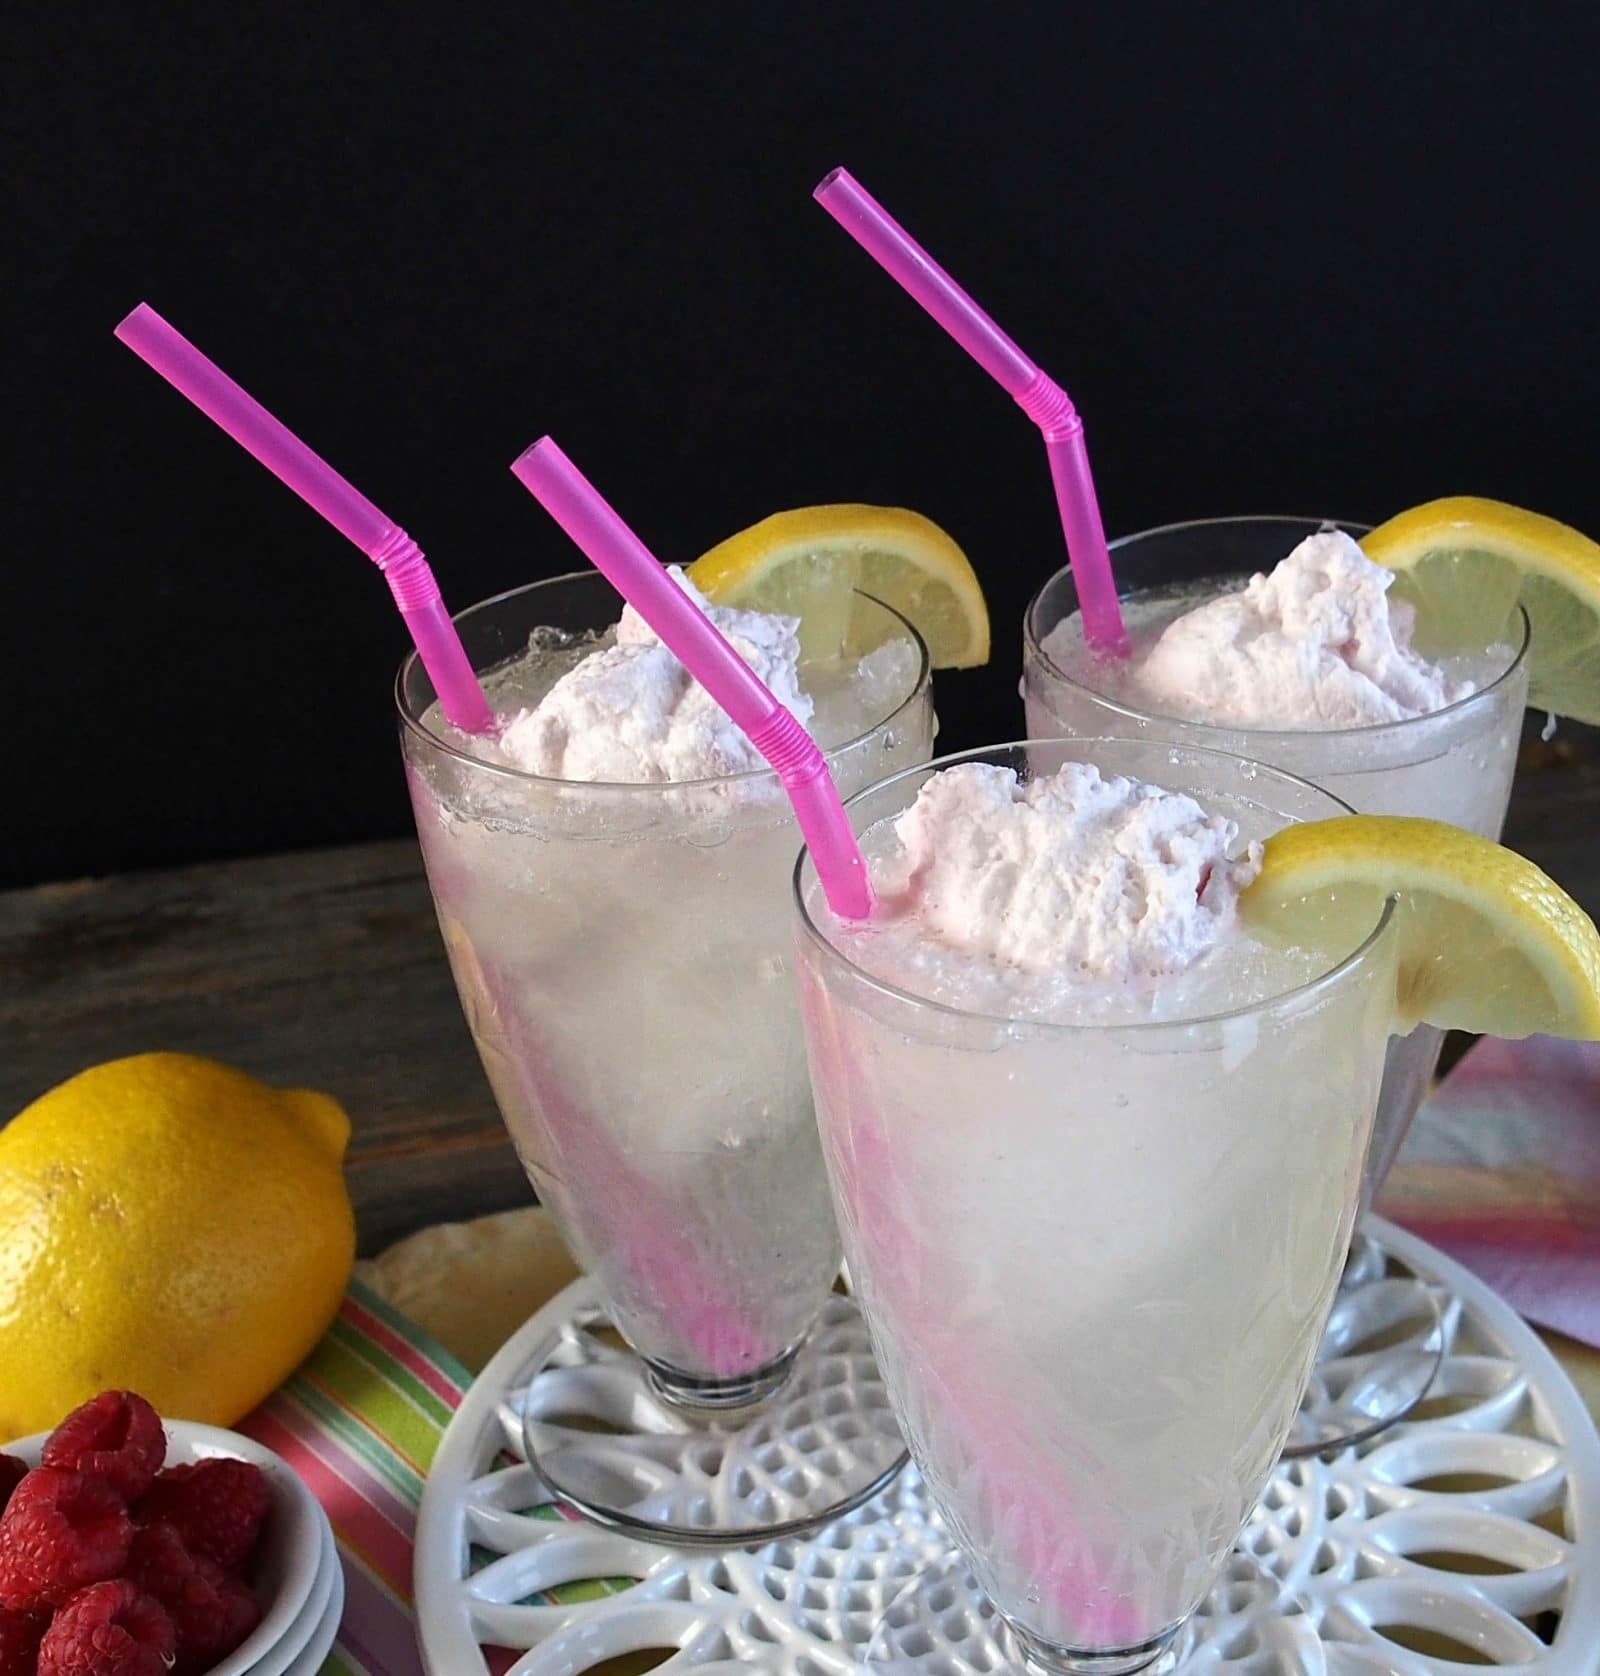 Homemade Lemonade with Raspberry Cream. Fresh squeezed lemonade swirled with Raspberry Mascarpone Cream. So heavenly, it must have been created by angels. Simply Sated